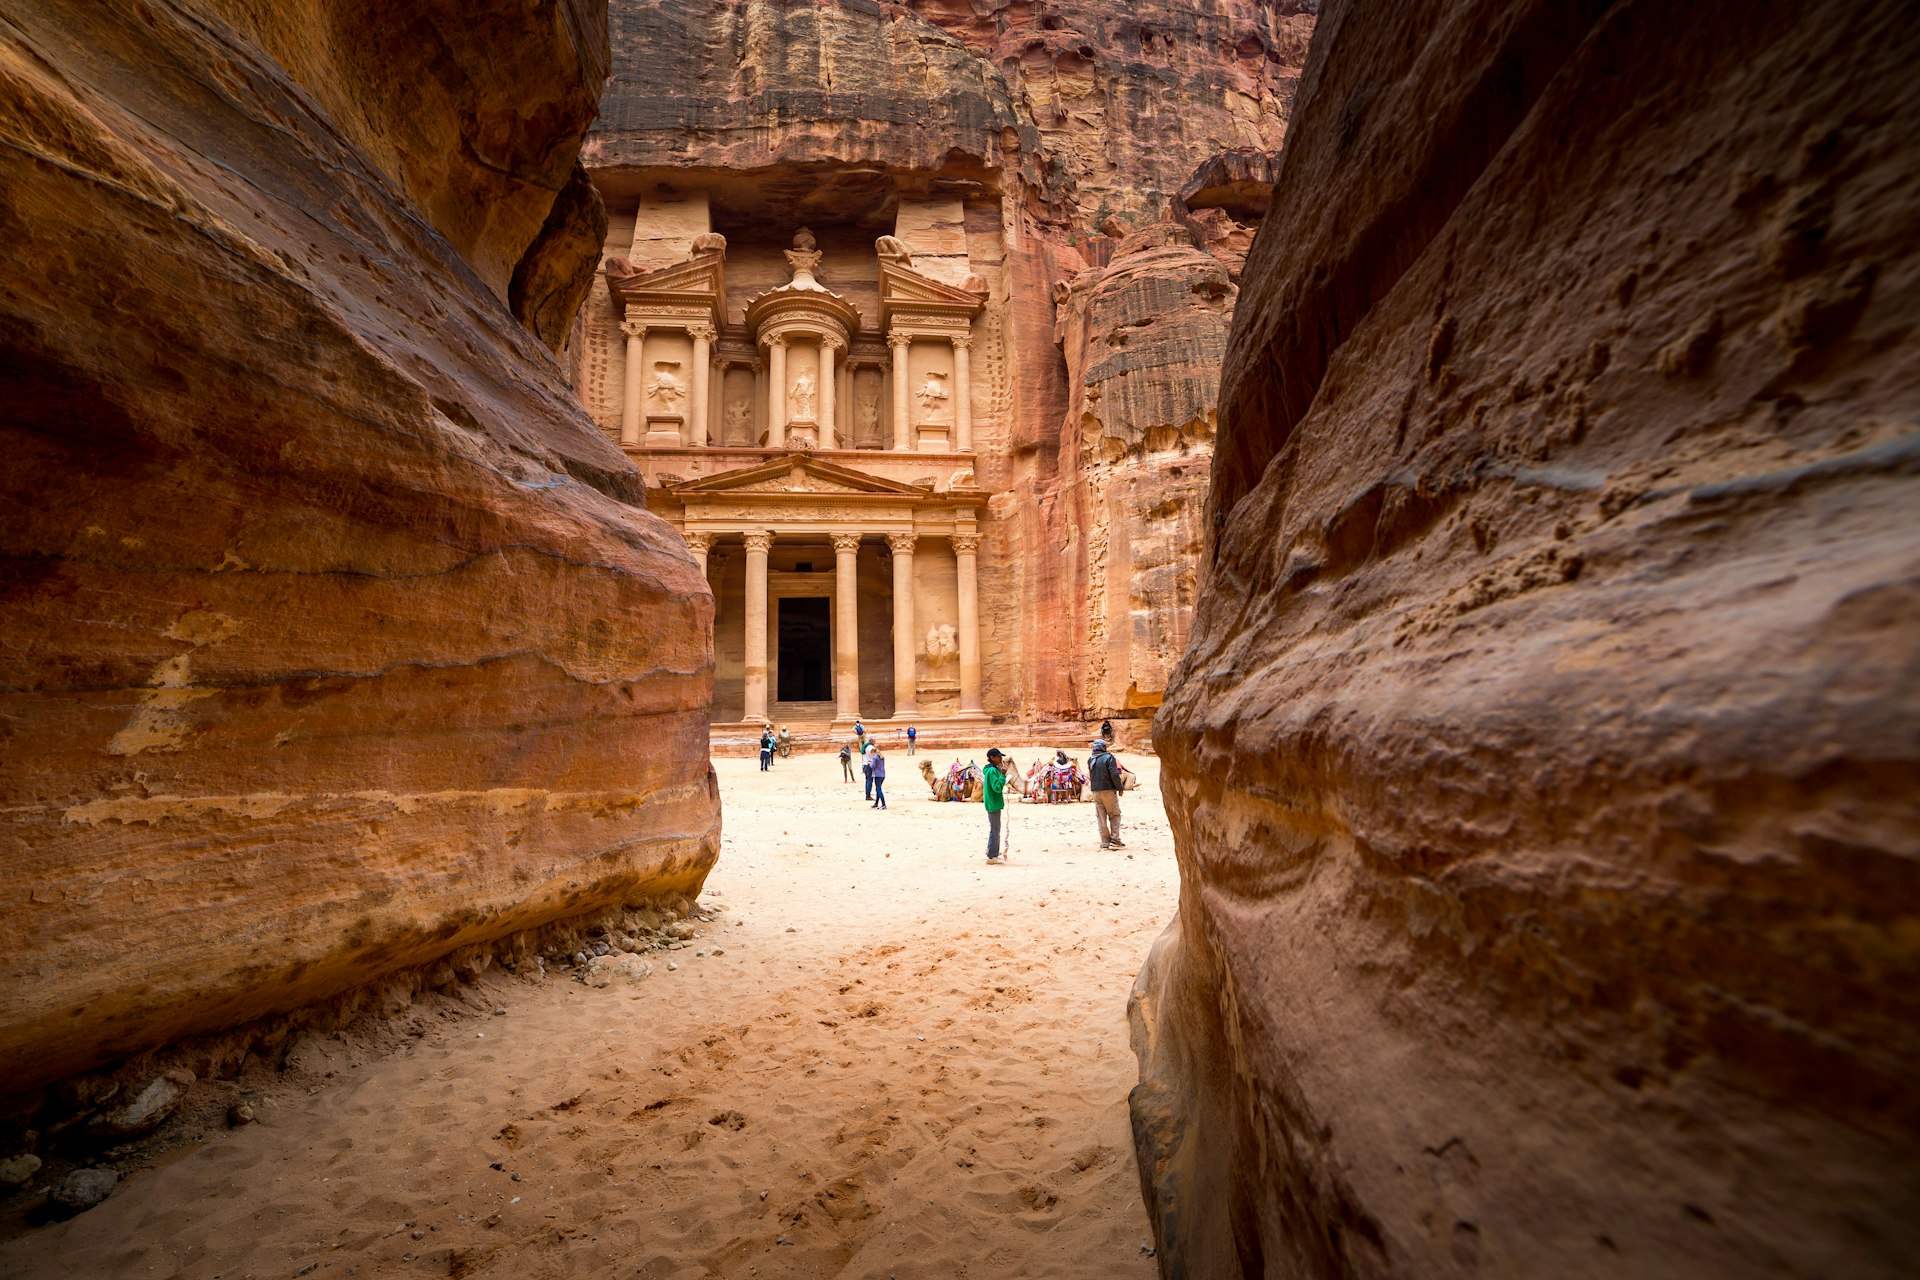 People in Al-Khazneh (The Treasury) in Petra, seen at the end of a sandy path through rocks  